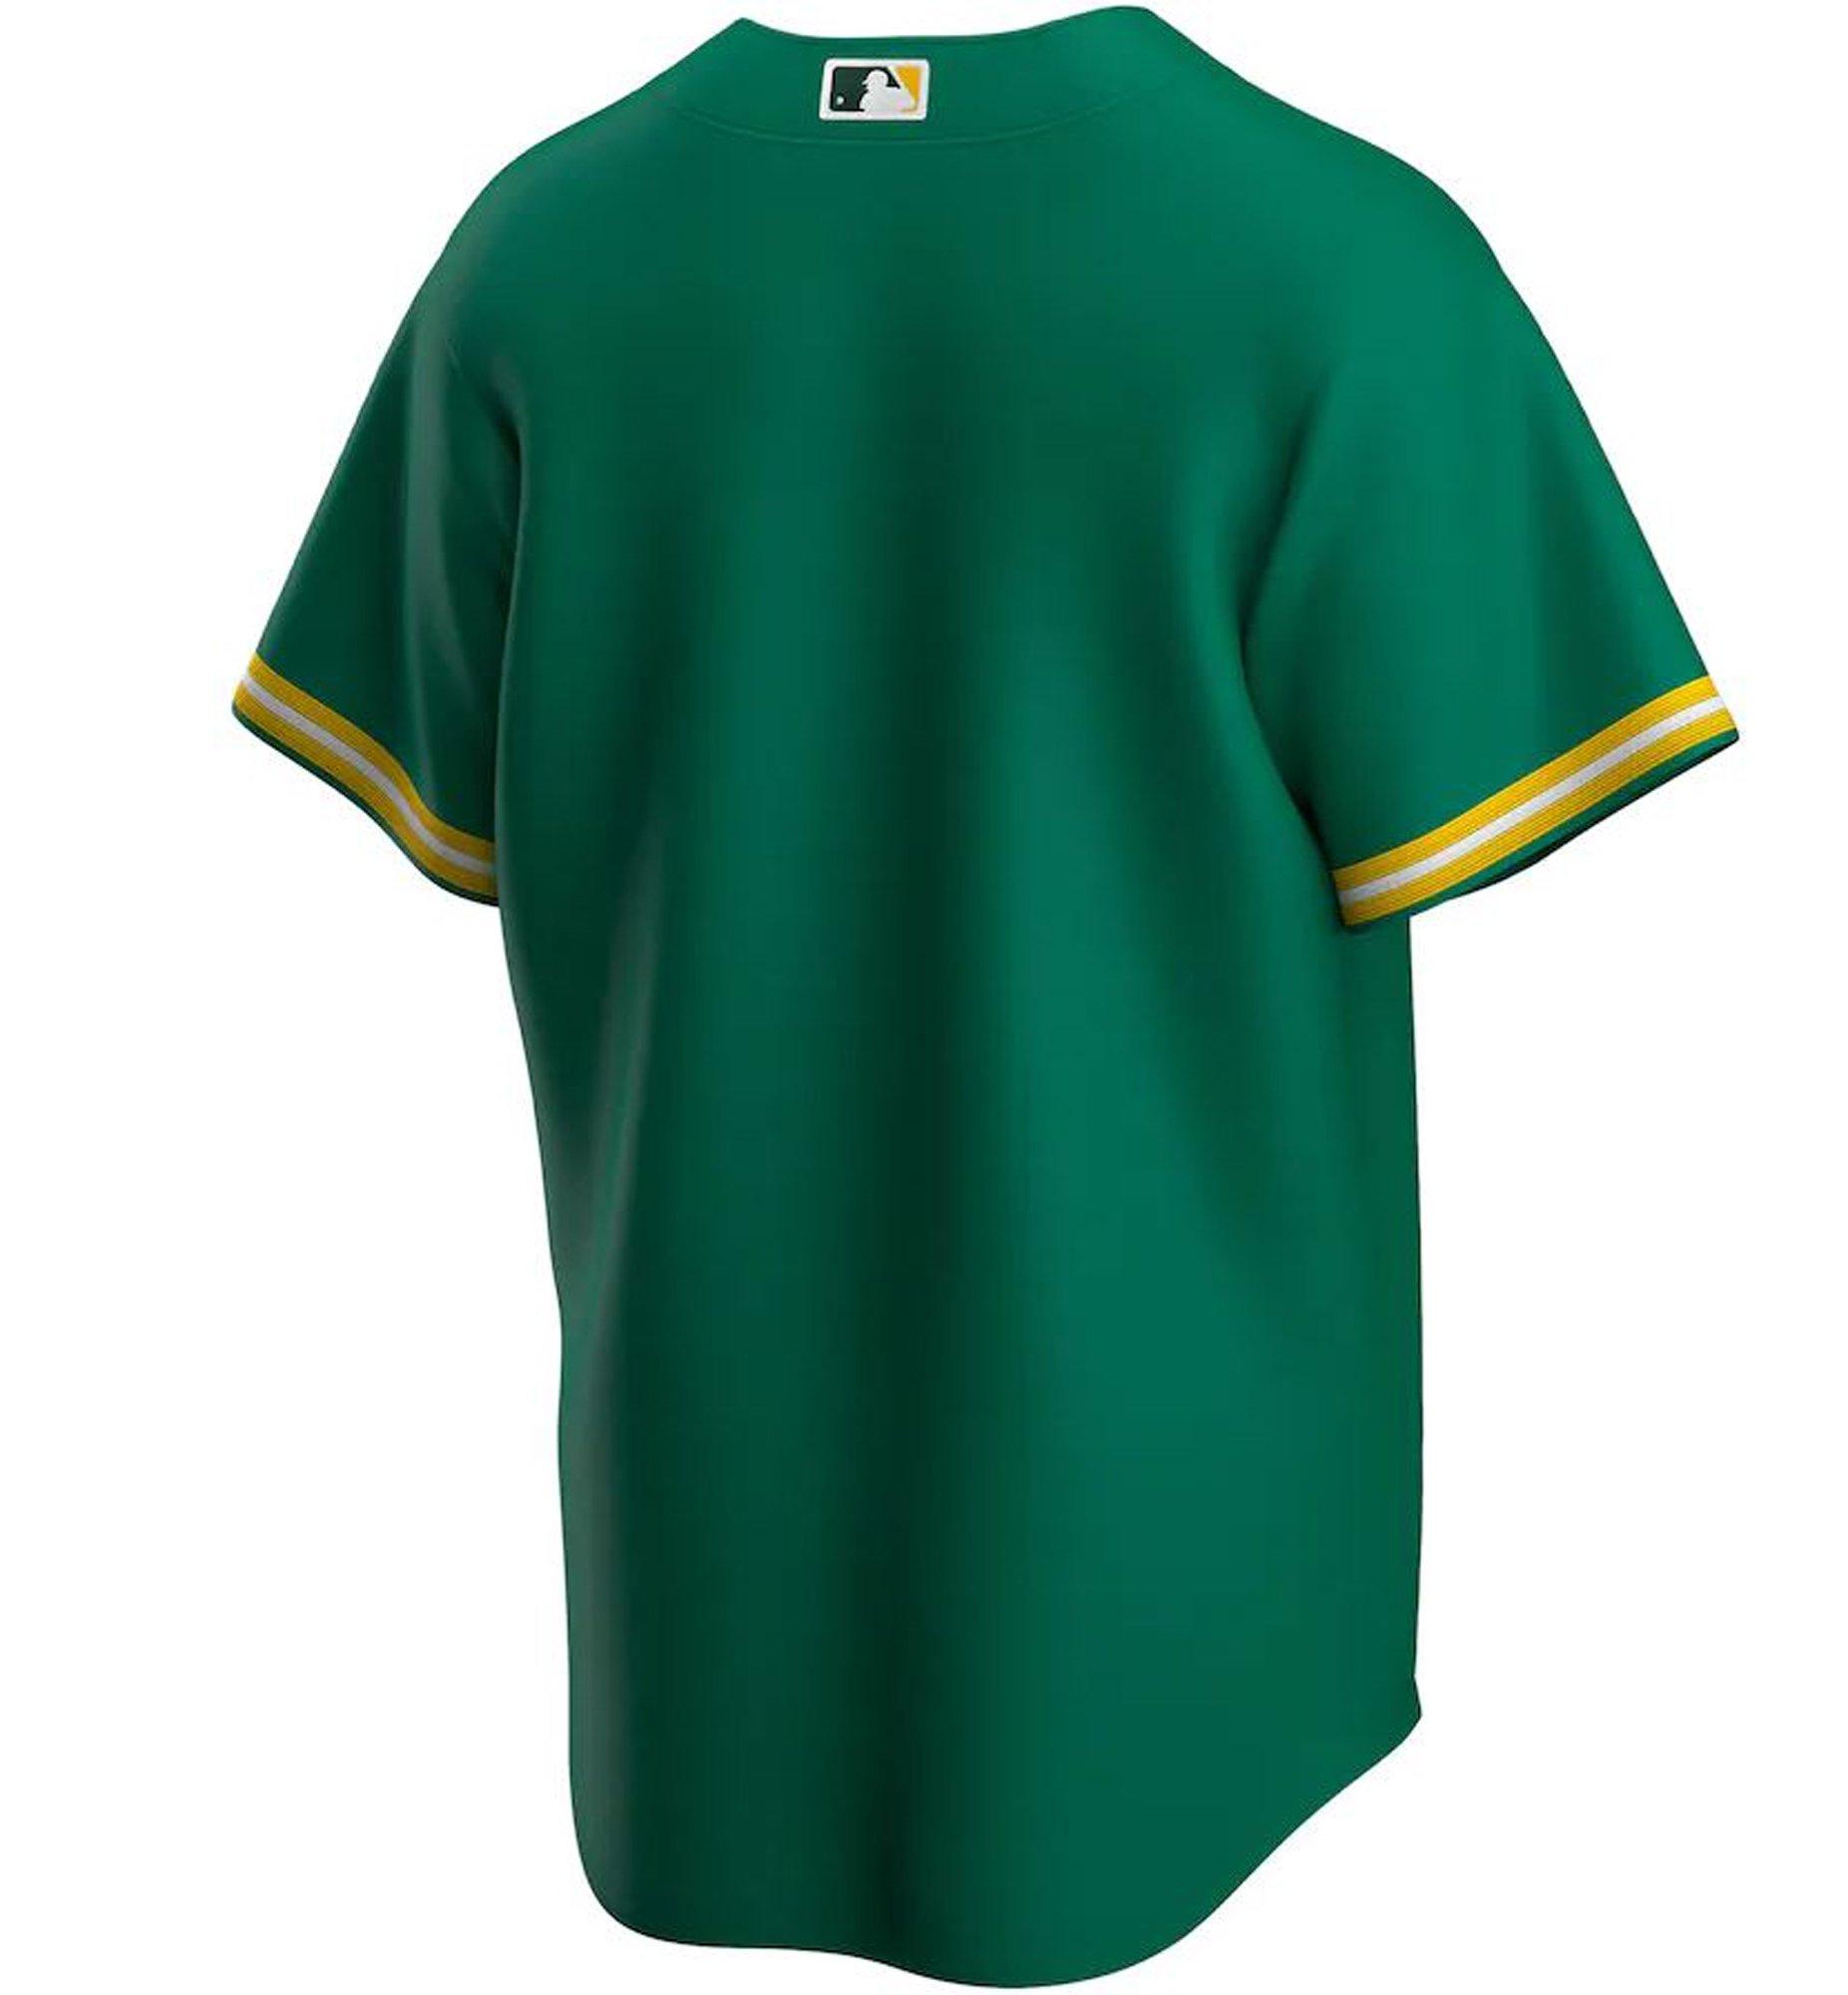 Oakland Athletics Men's Embroidered Logo Replica Jersey Big Tall 2X up to  4XT